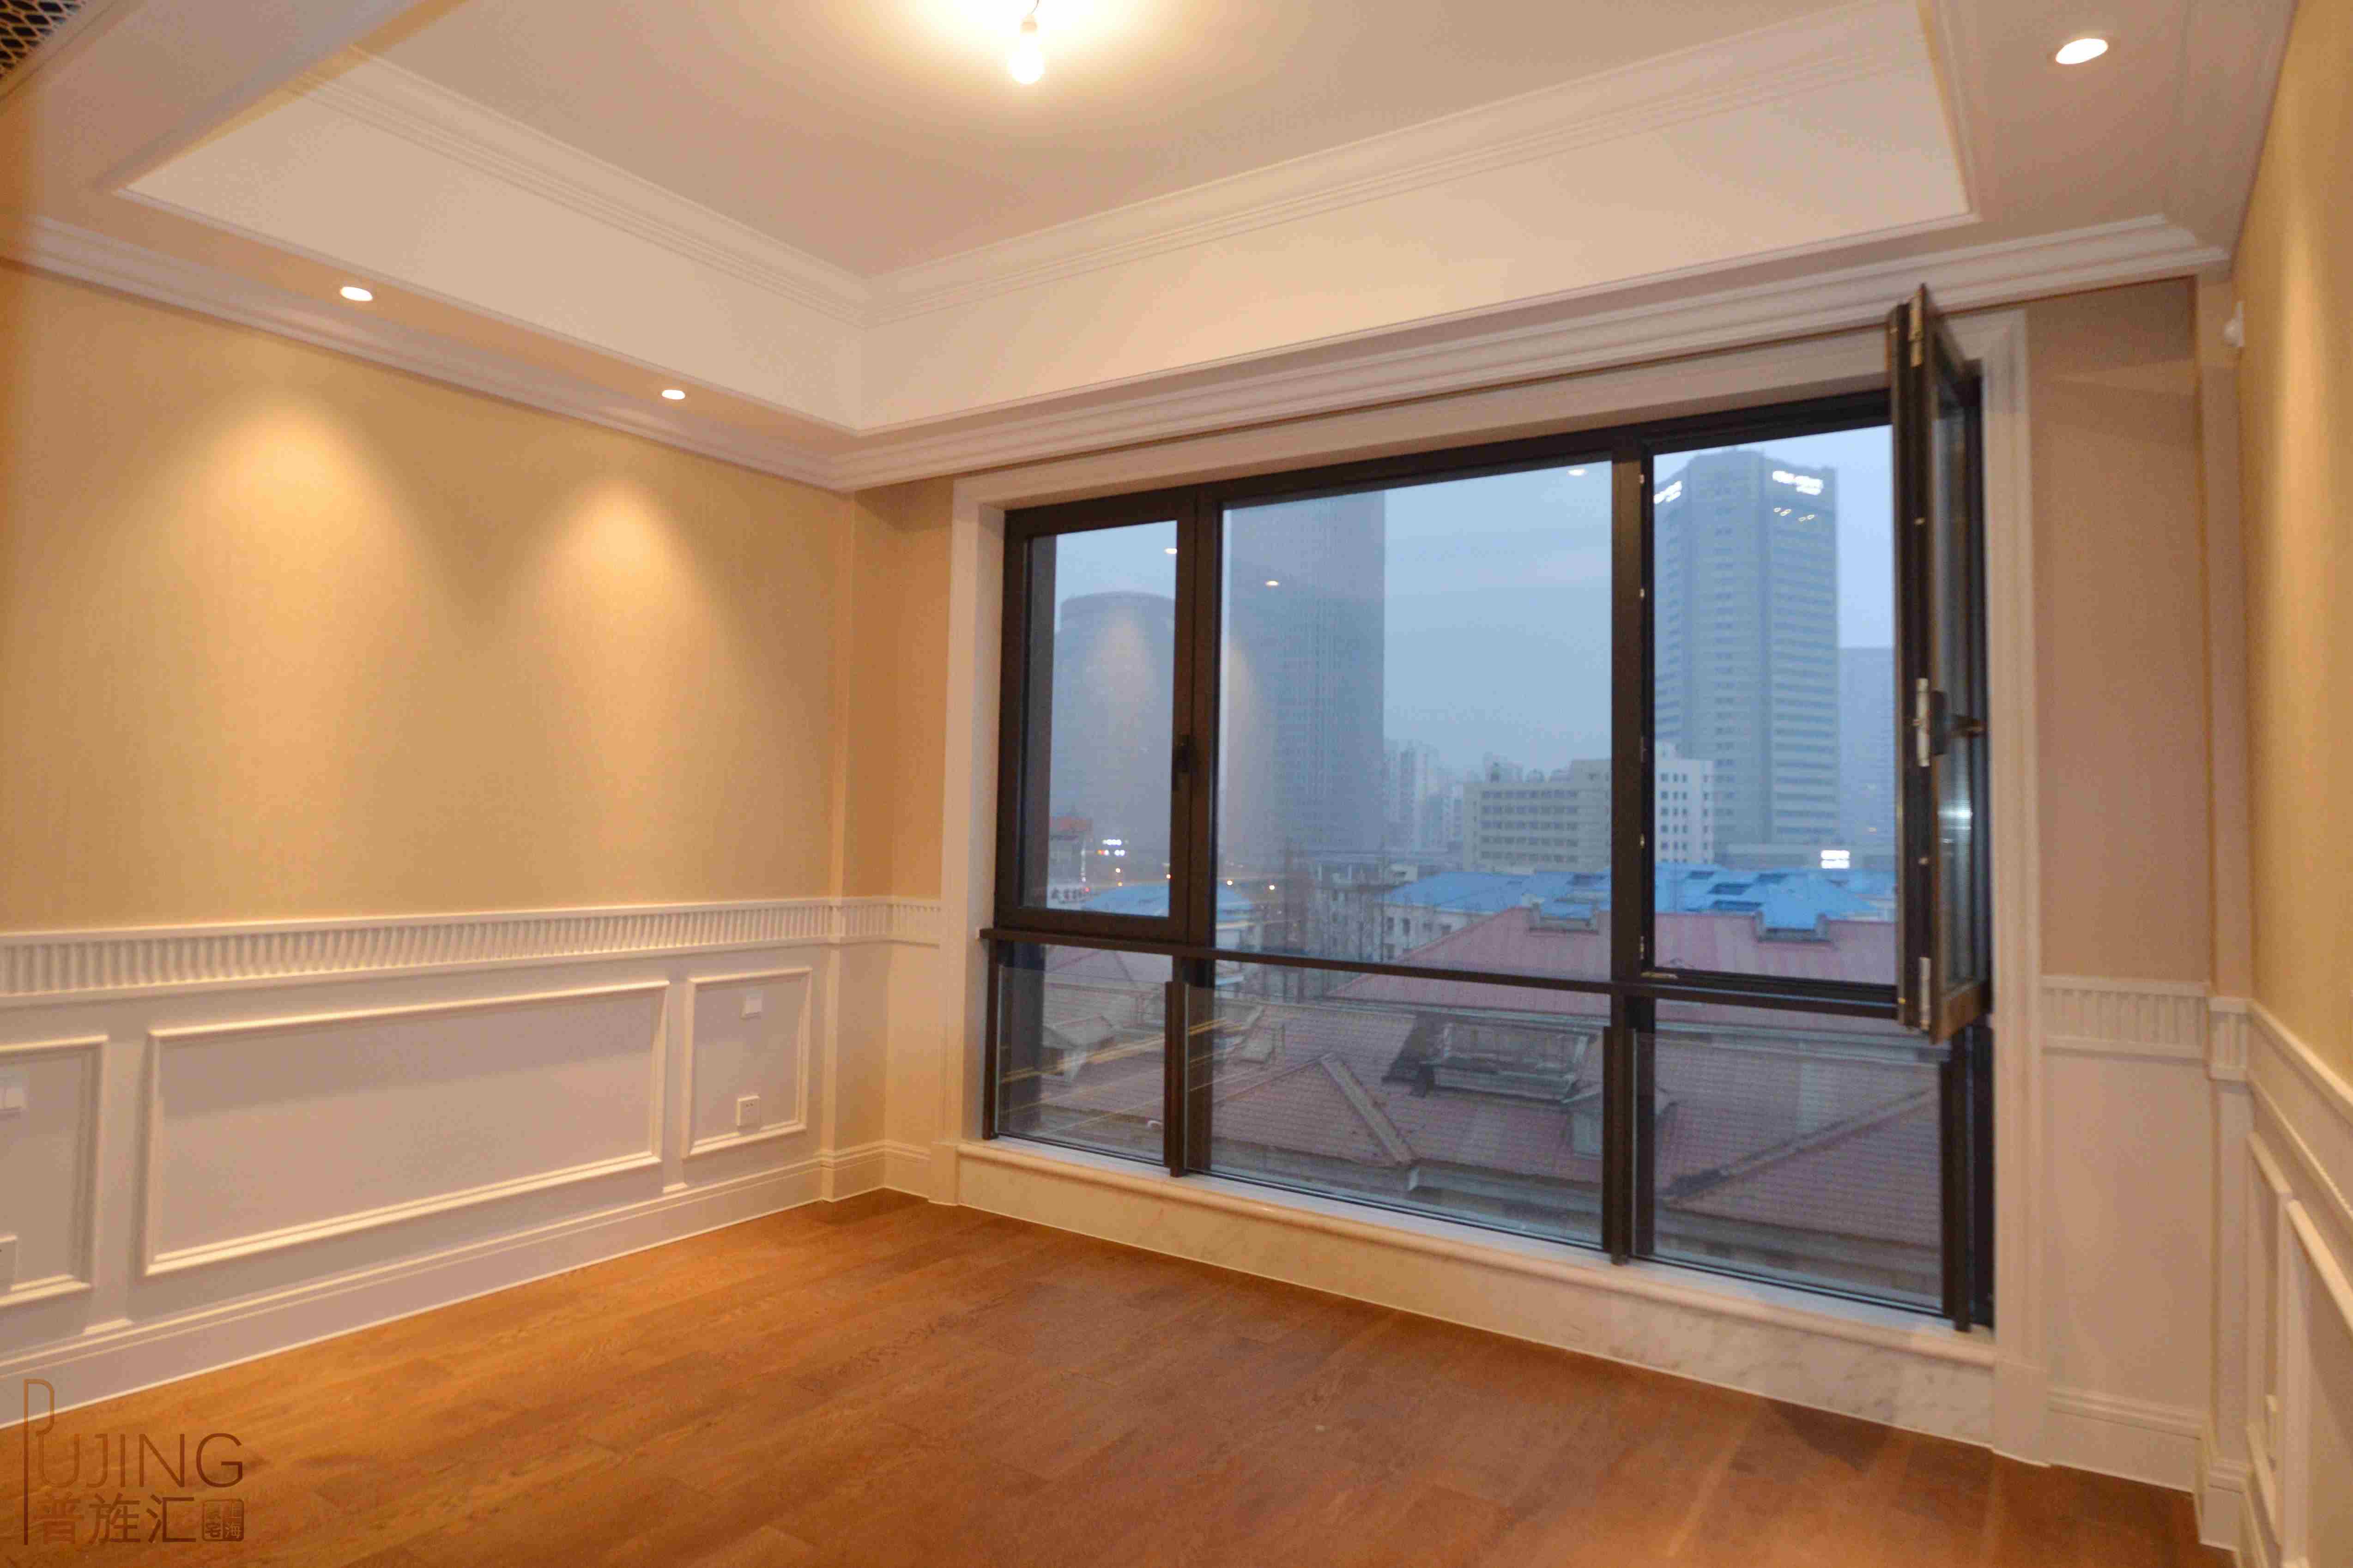  Luxurious 4BR Apartment for Rent in Pudong